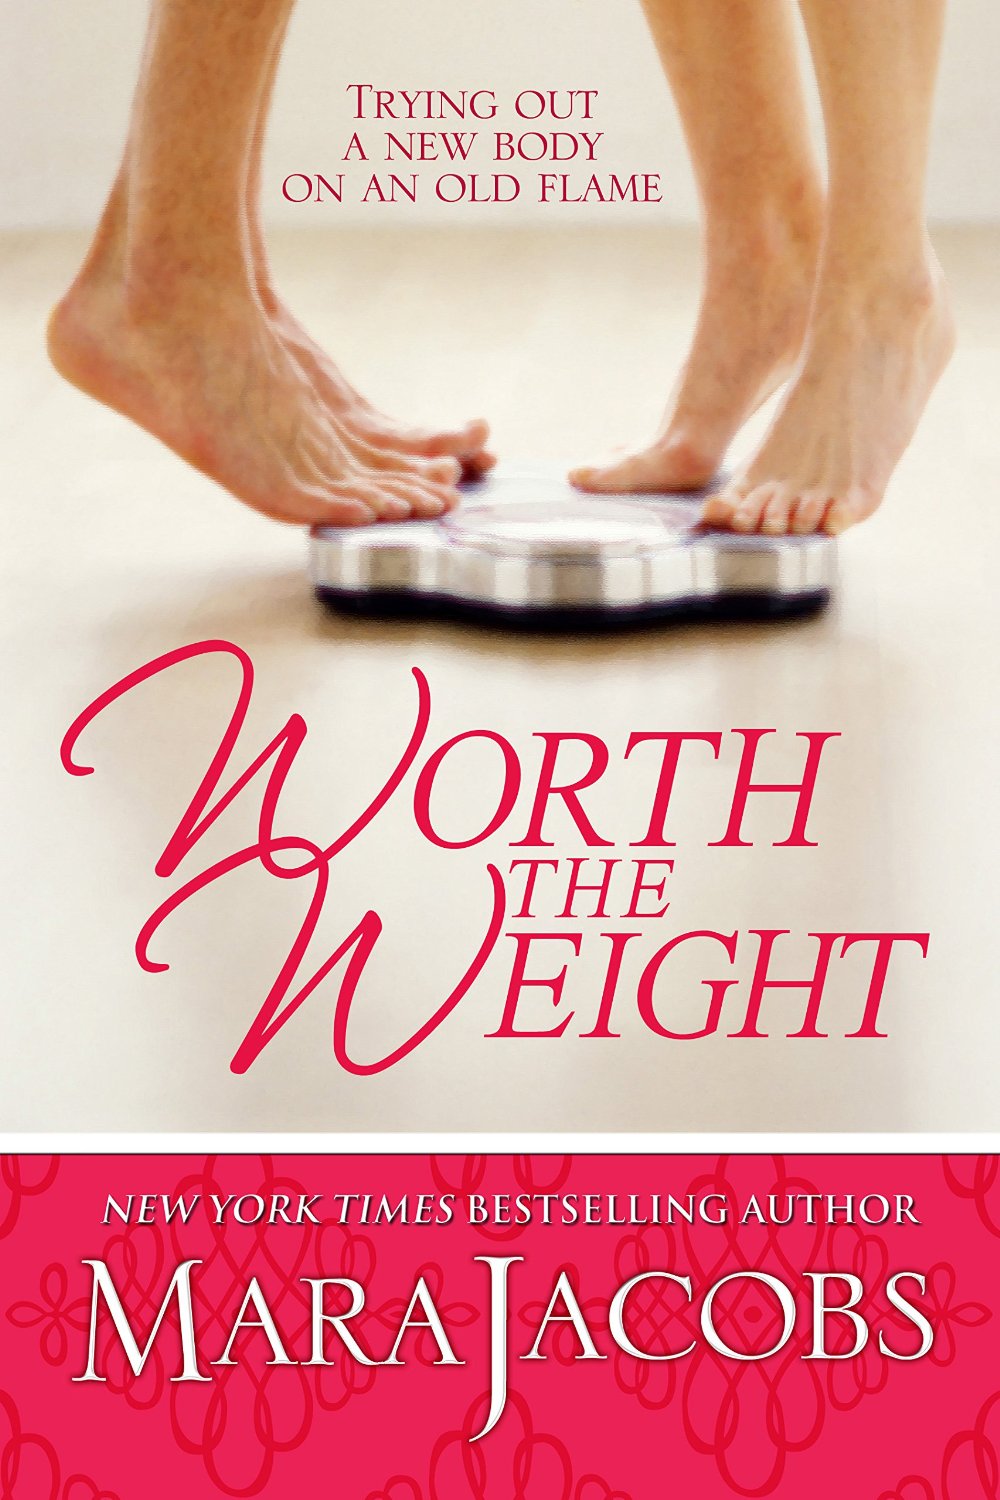 Worth The Weight (The Worth Series Book 1: A Copper Country Romance) by Mara Jacobs